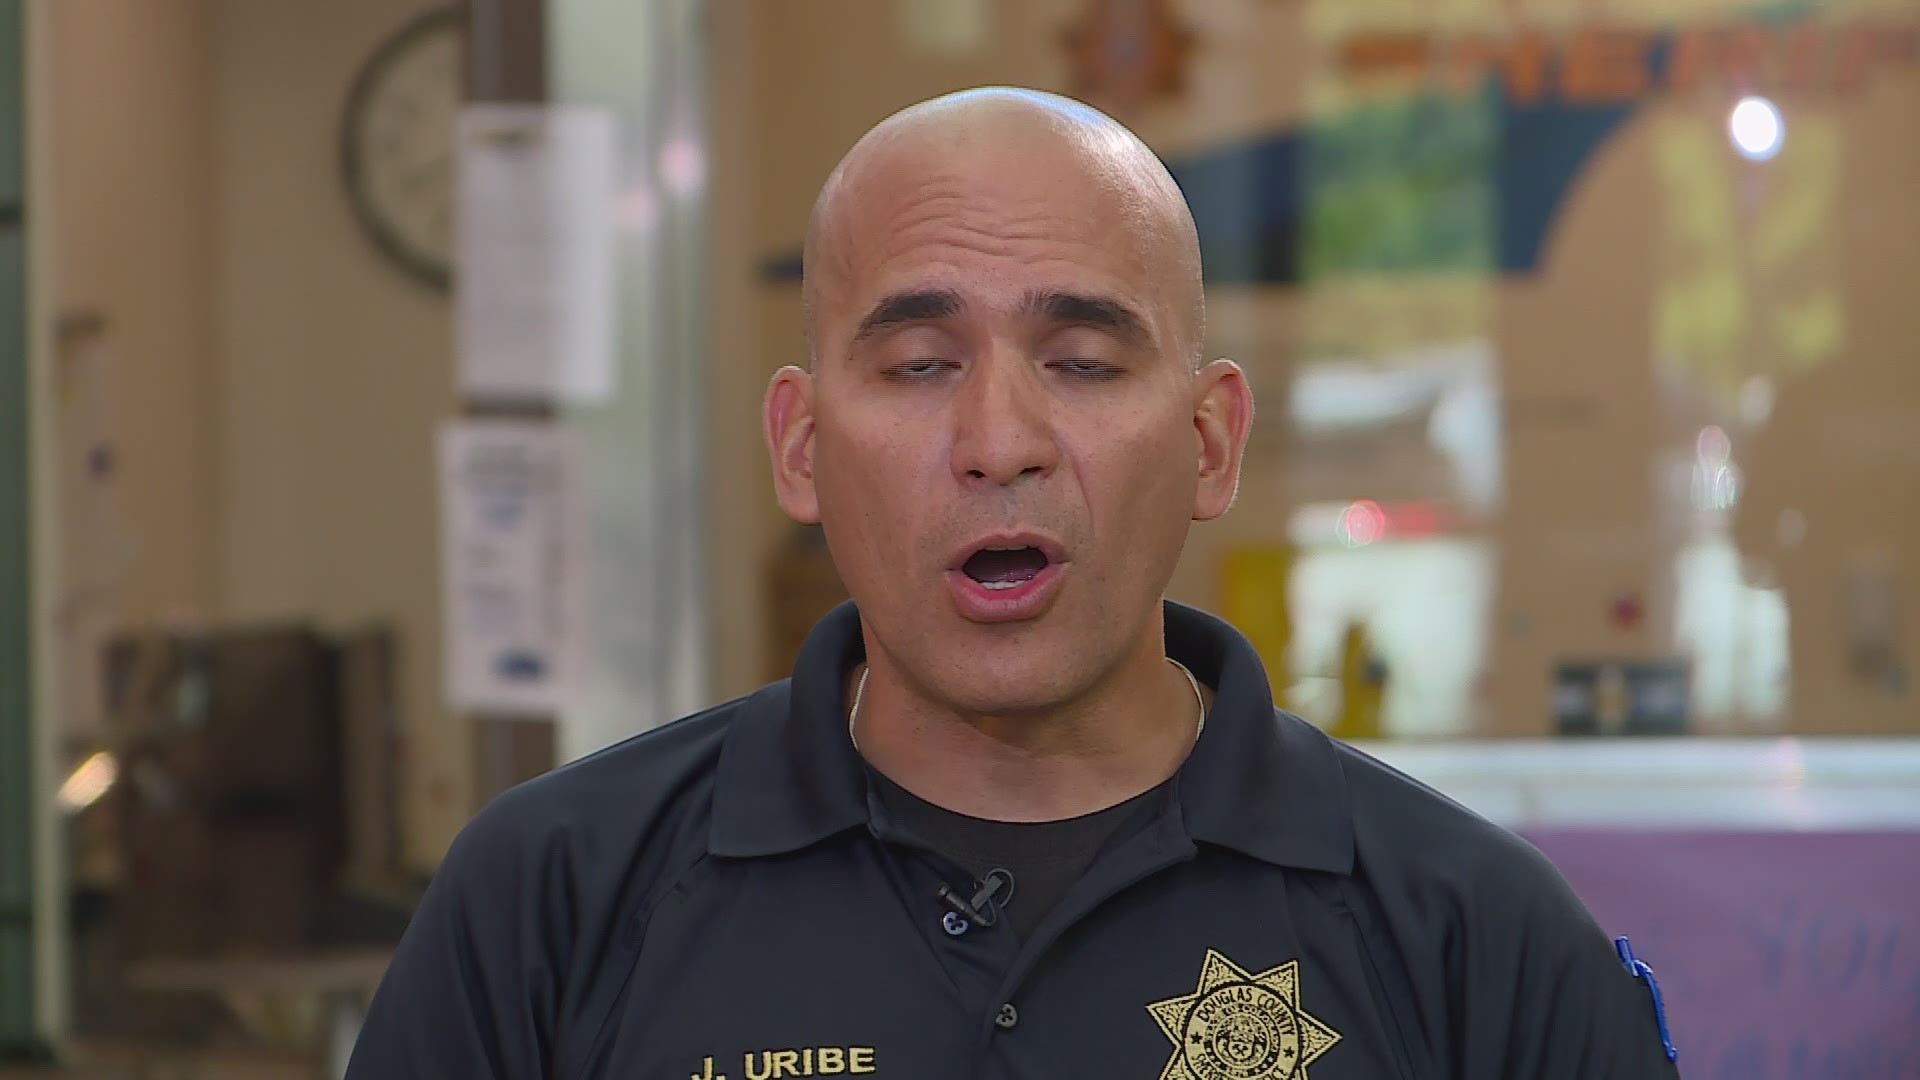 Douglas County Sheriff’s Deputy Gabriel Uribe wants students to feel save when they return to school.